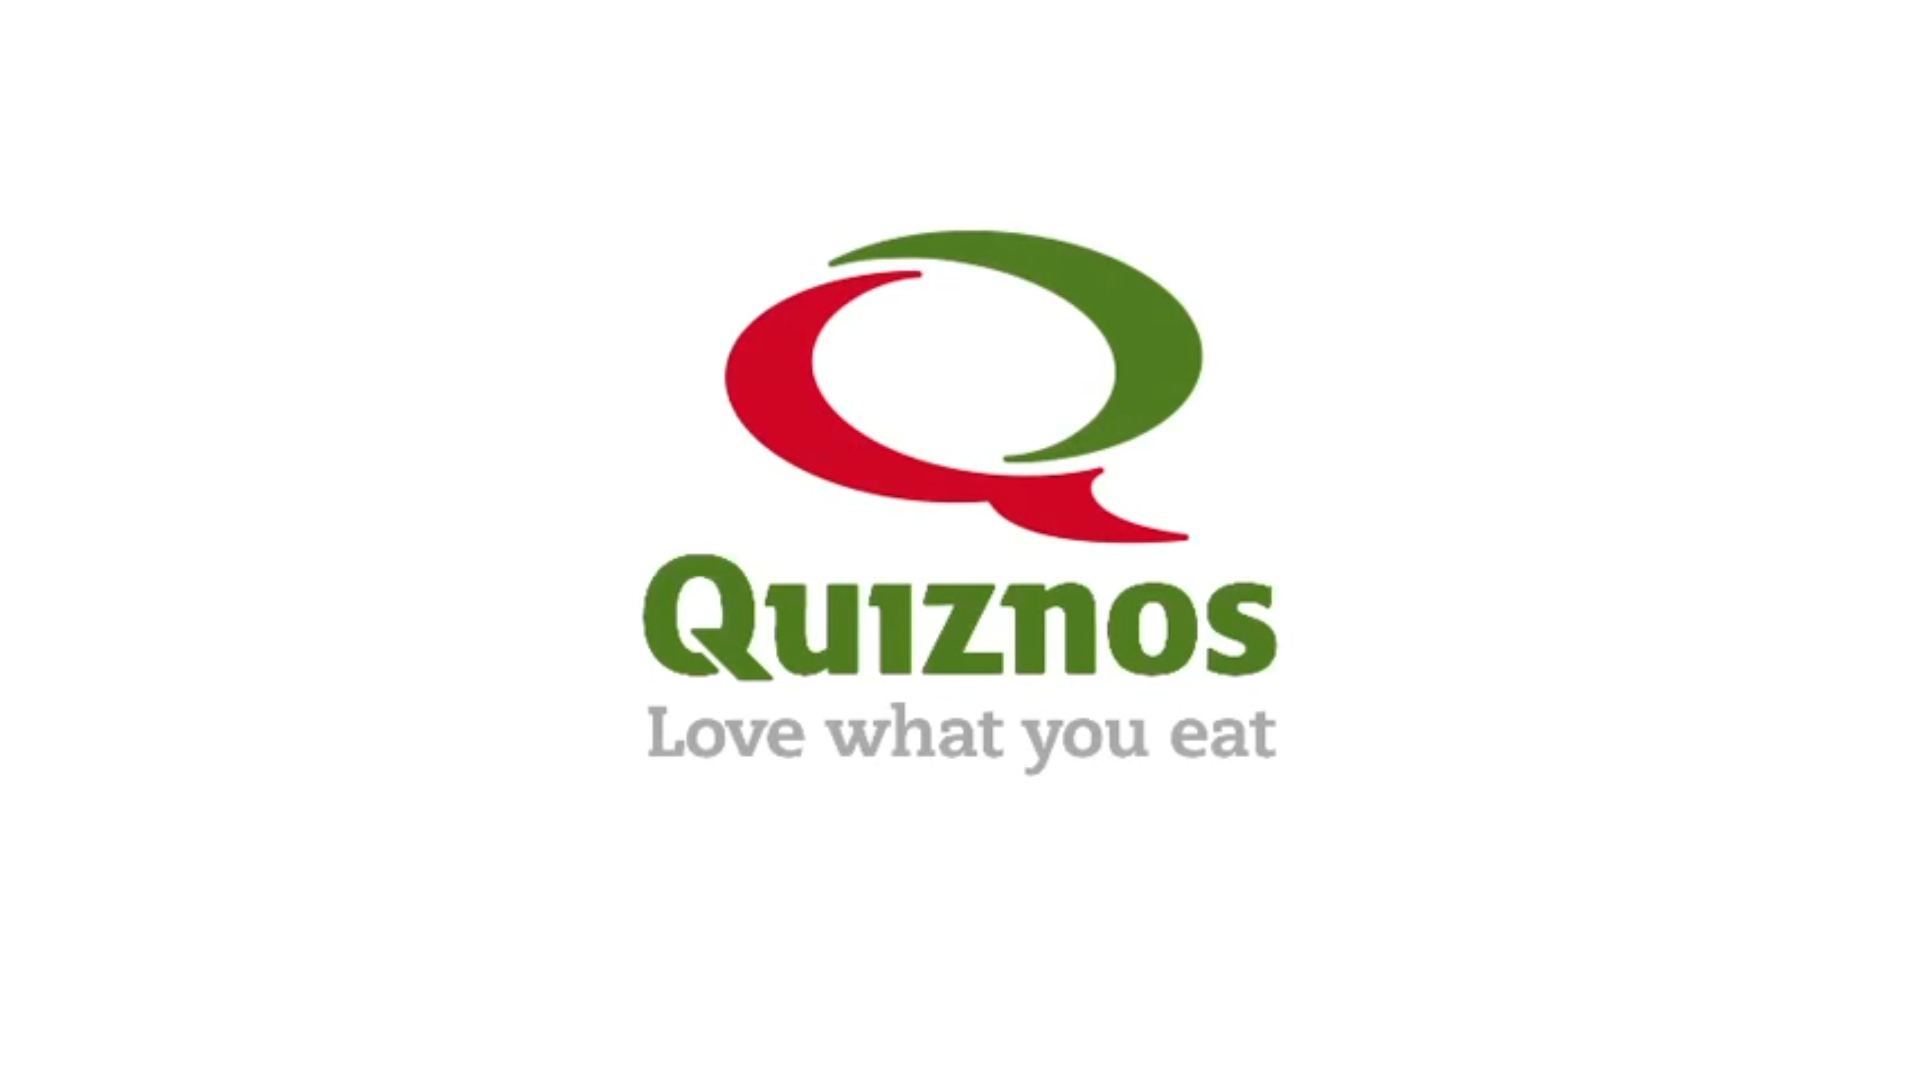 Quiznos Catering Menu | Quiznos Catering Prices and Prices September 2019